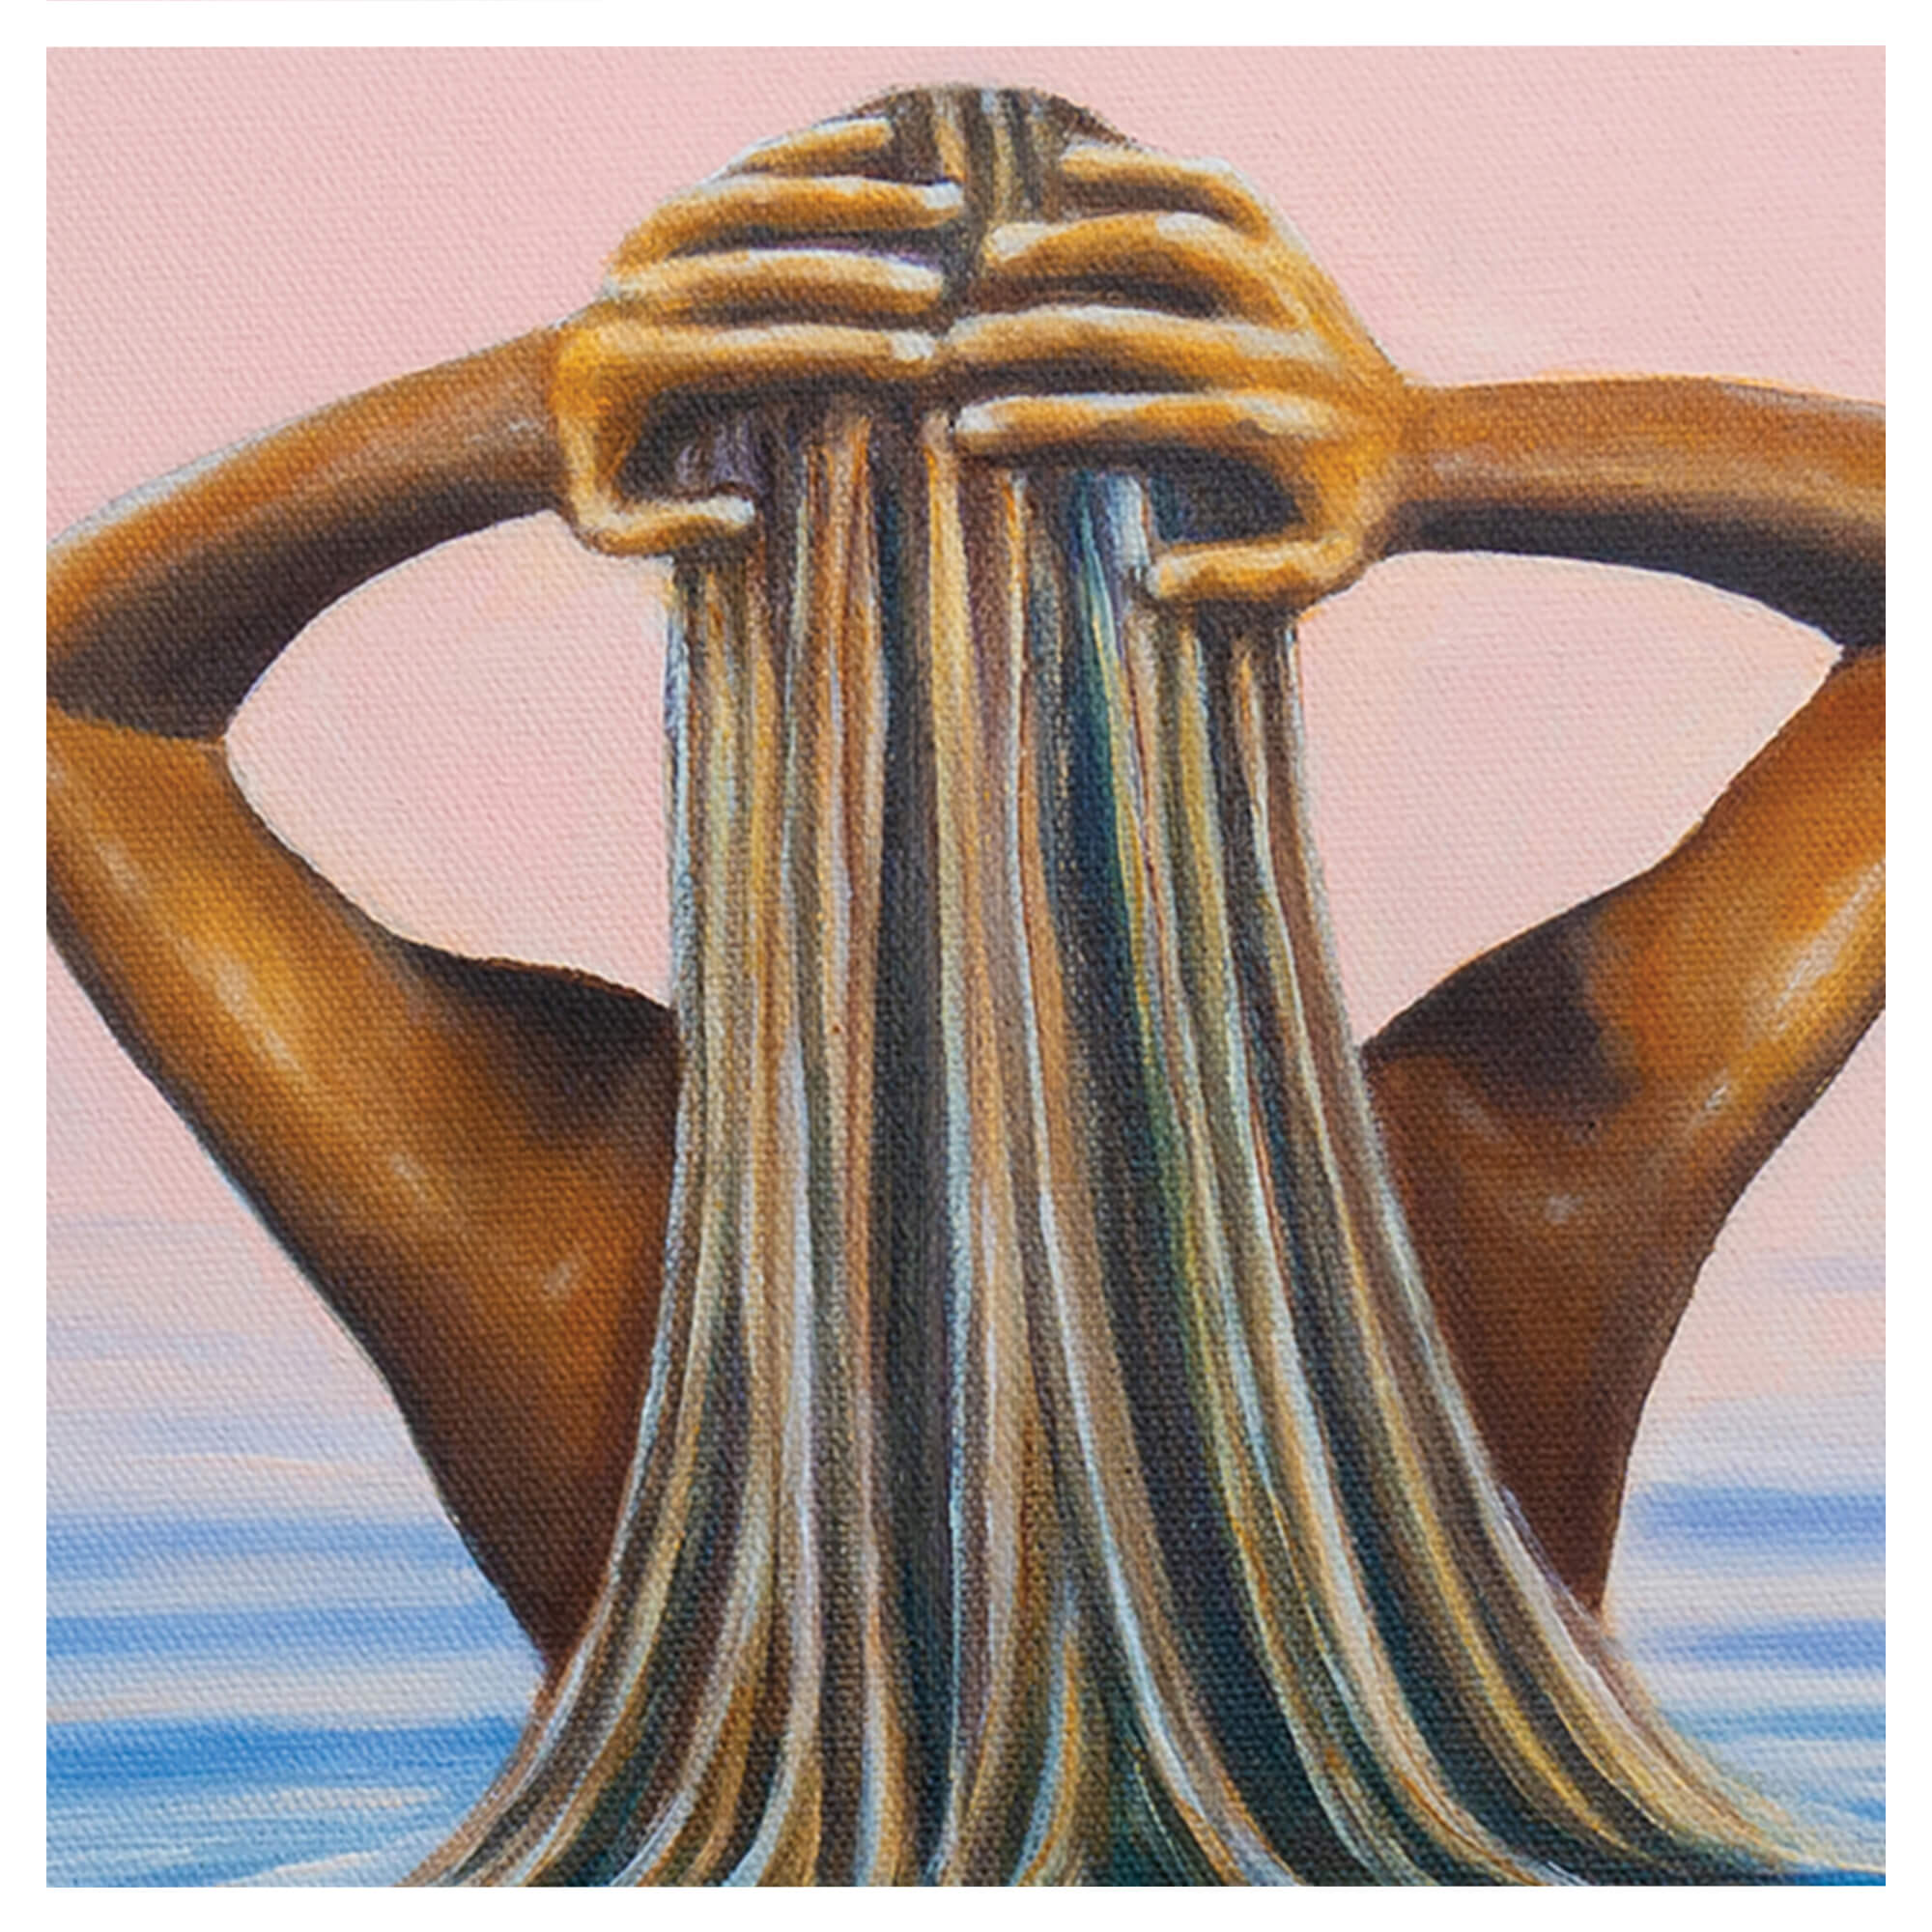 A painting of a blonde woman's hair by Hawaii artist Kelly Keane